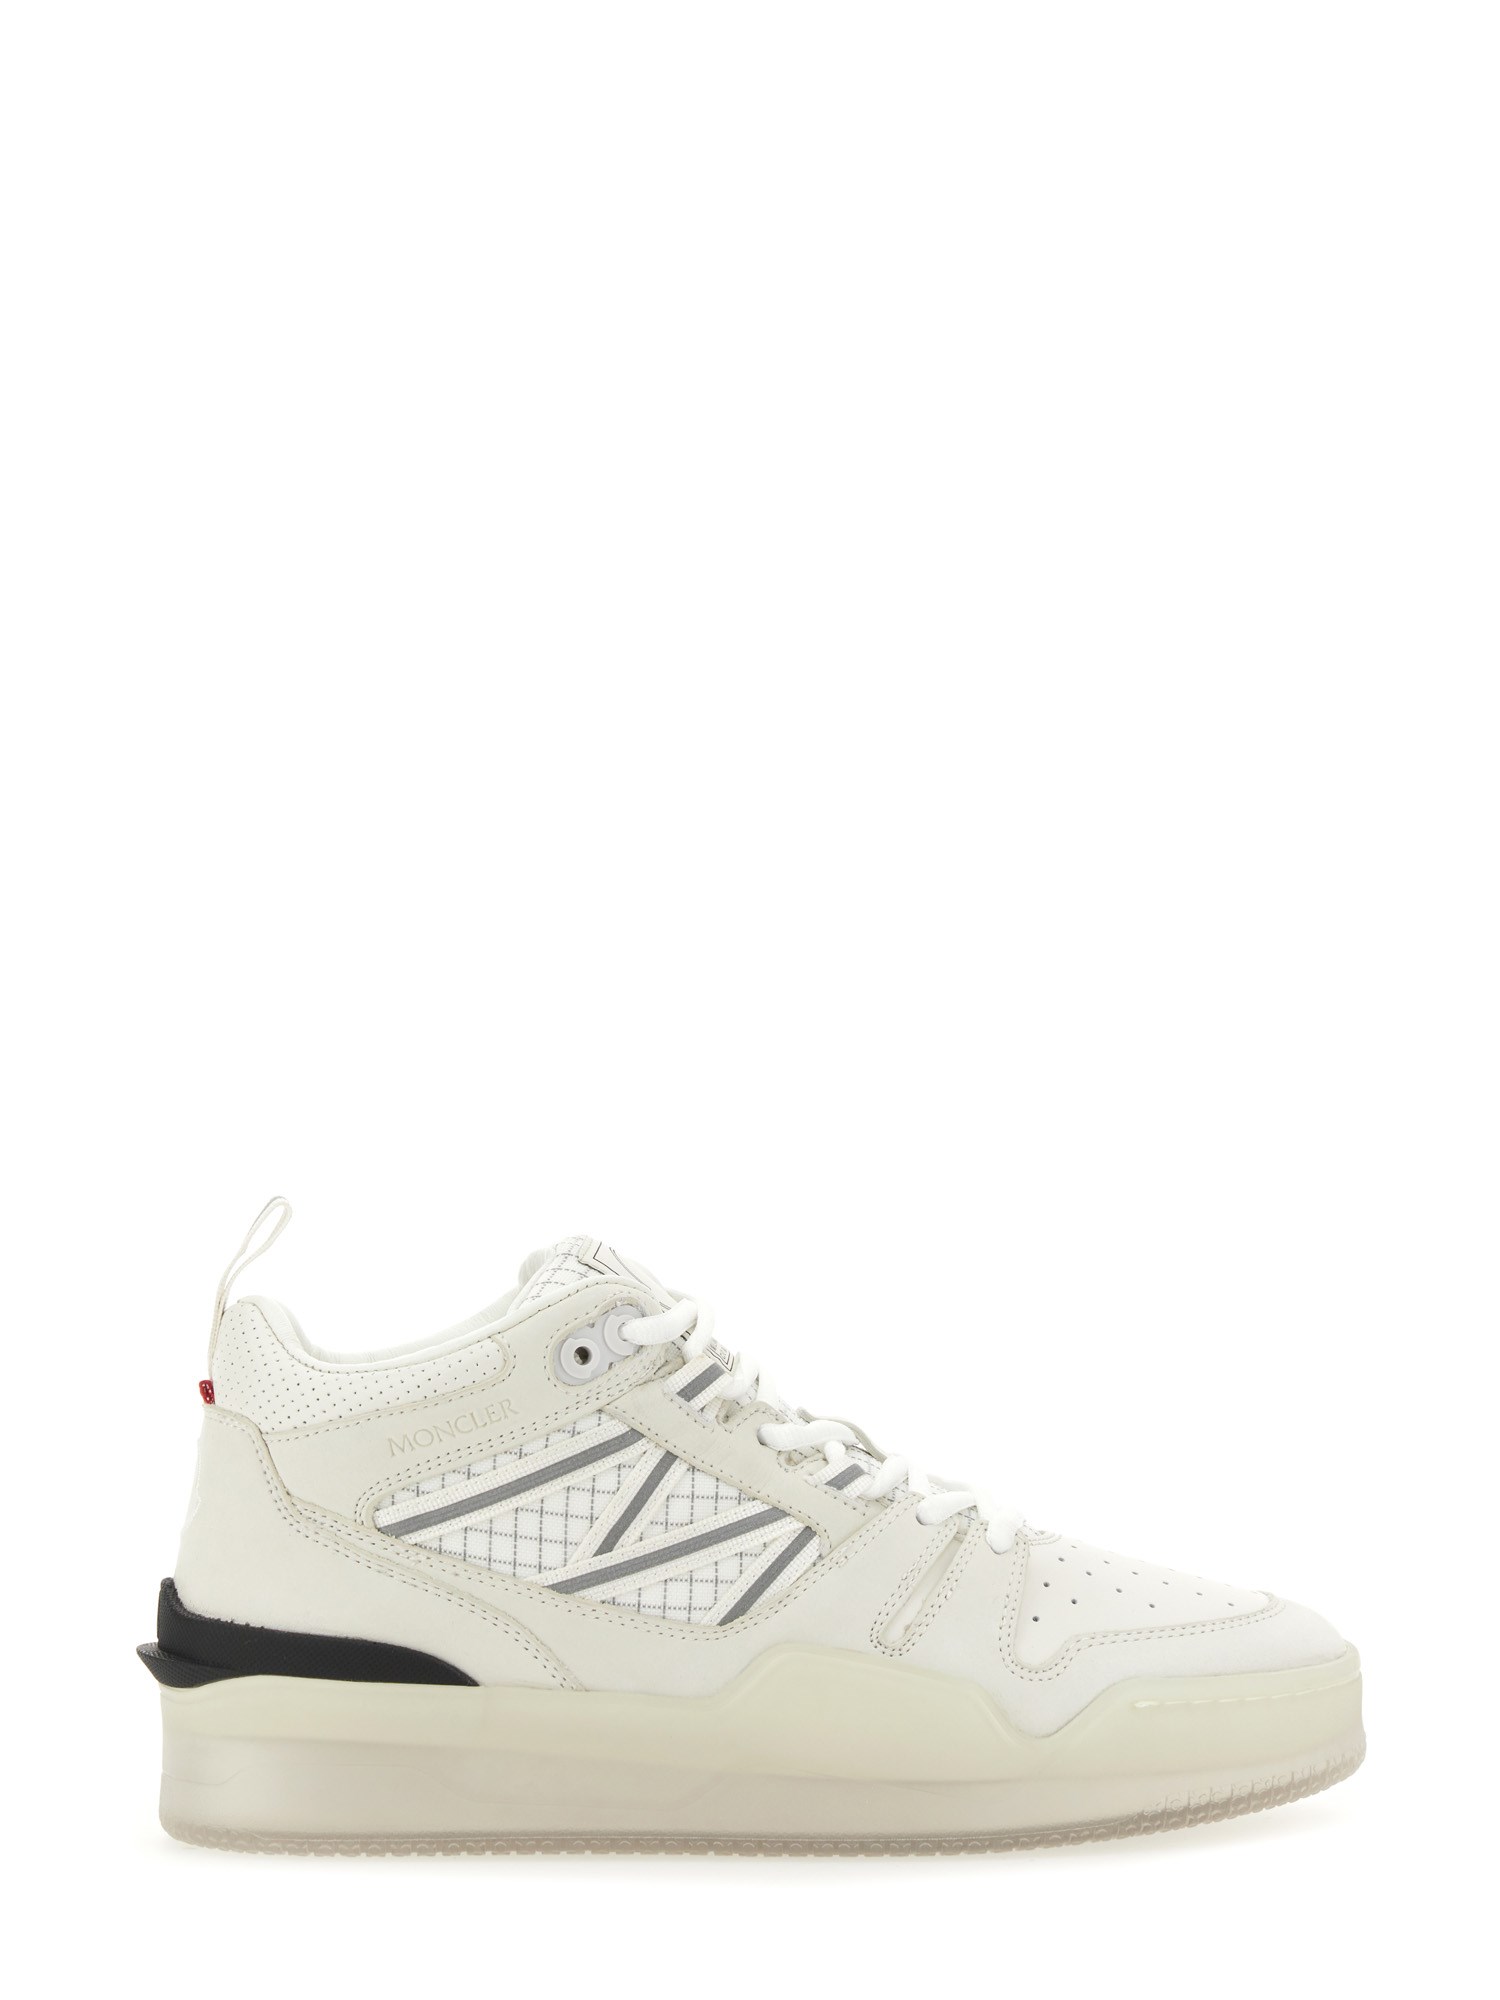 Moncler Trainer High Top Pivot In White